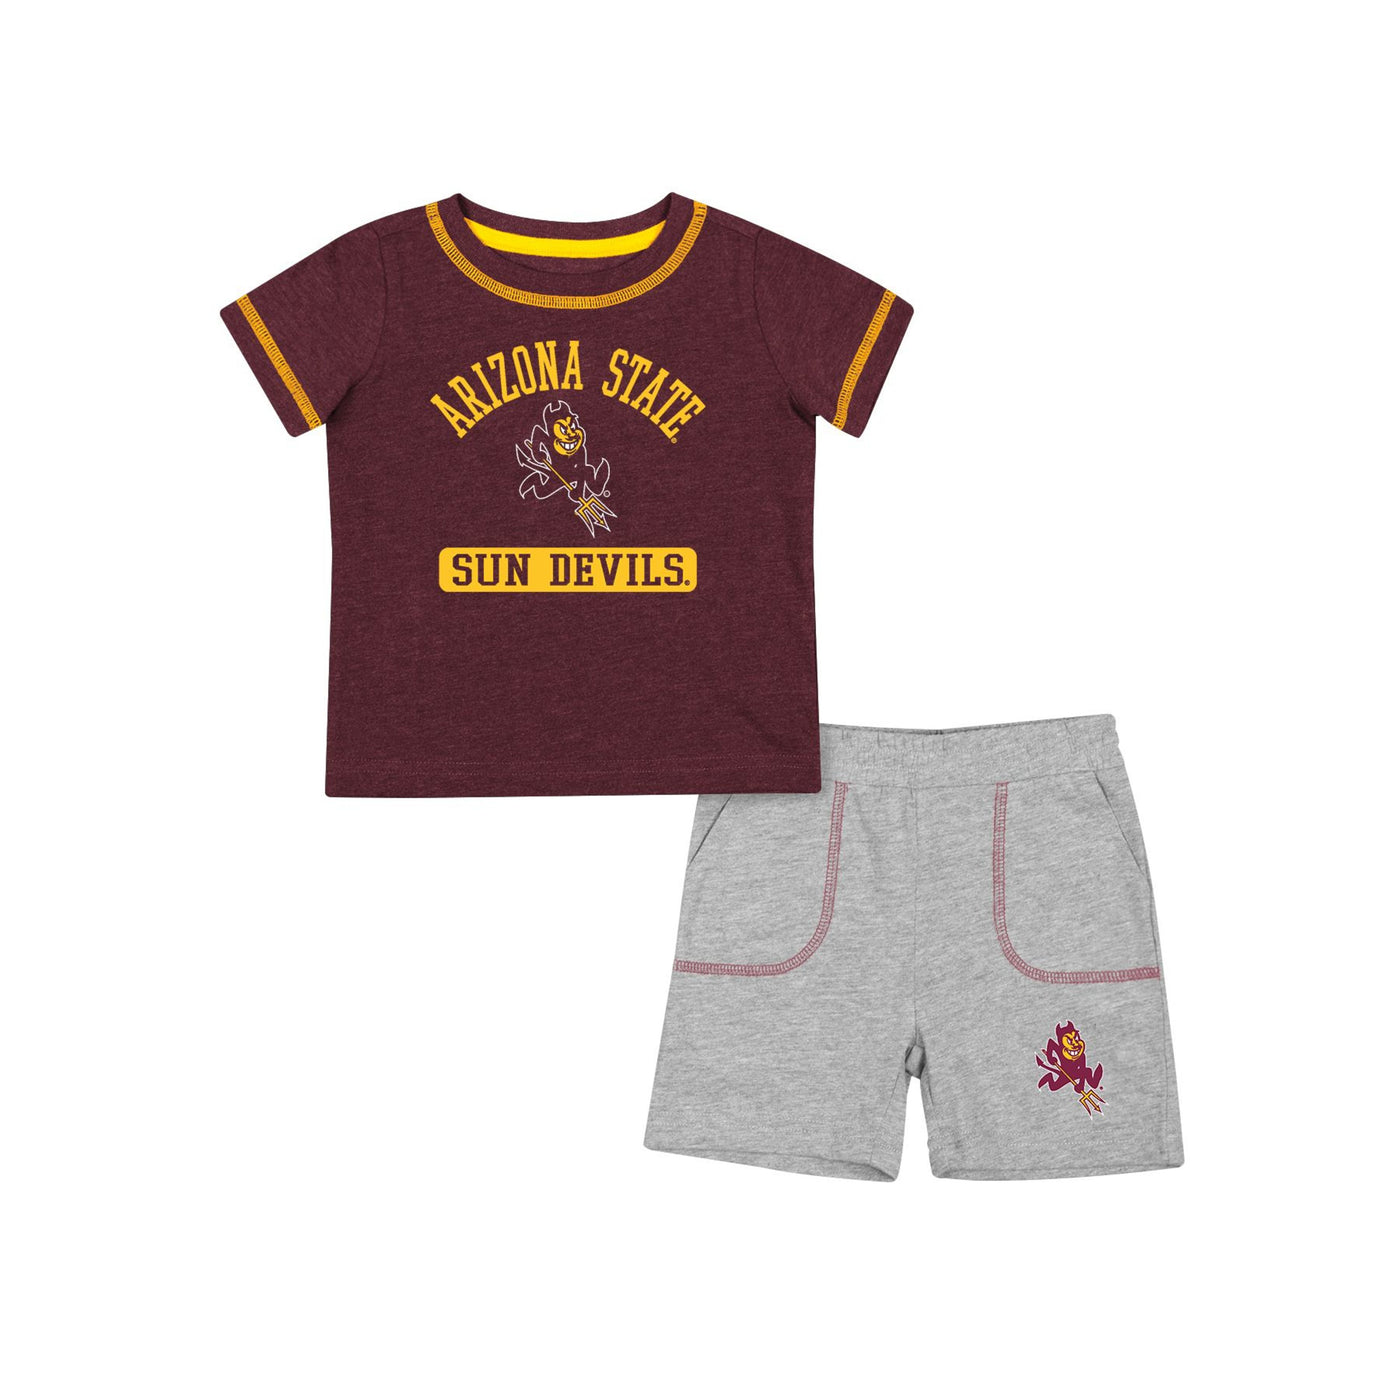 ASU infant shirt and short set. The shirt is maroon with gold stitching around the arm and neckline. On the shirt is gold text 